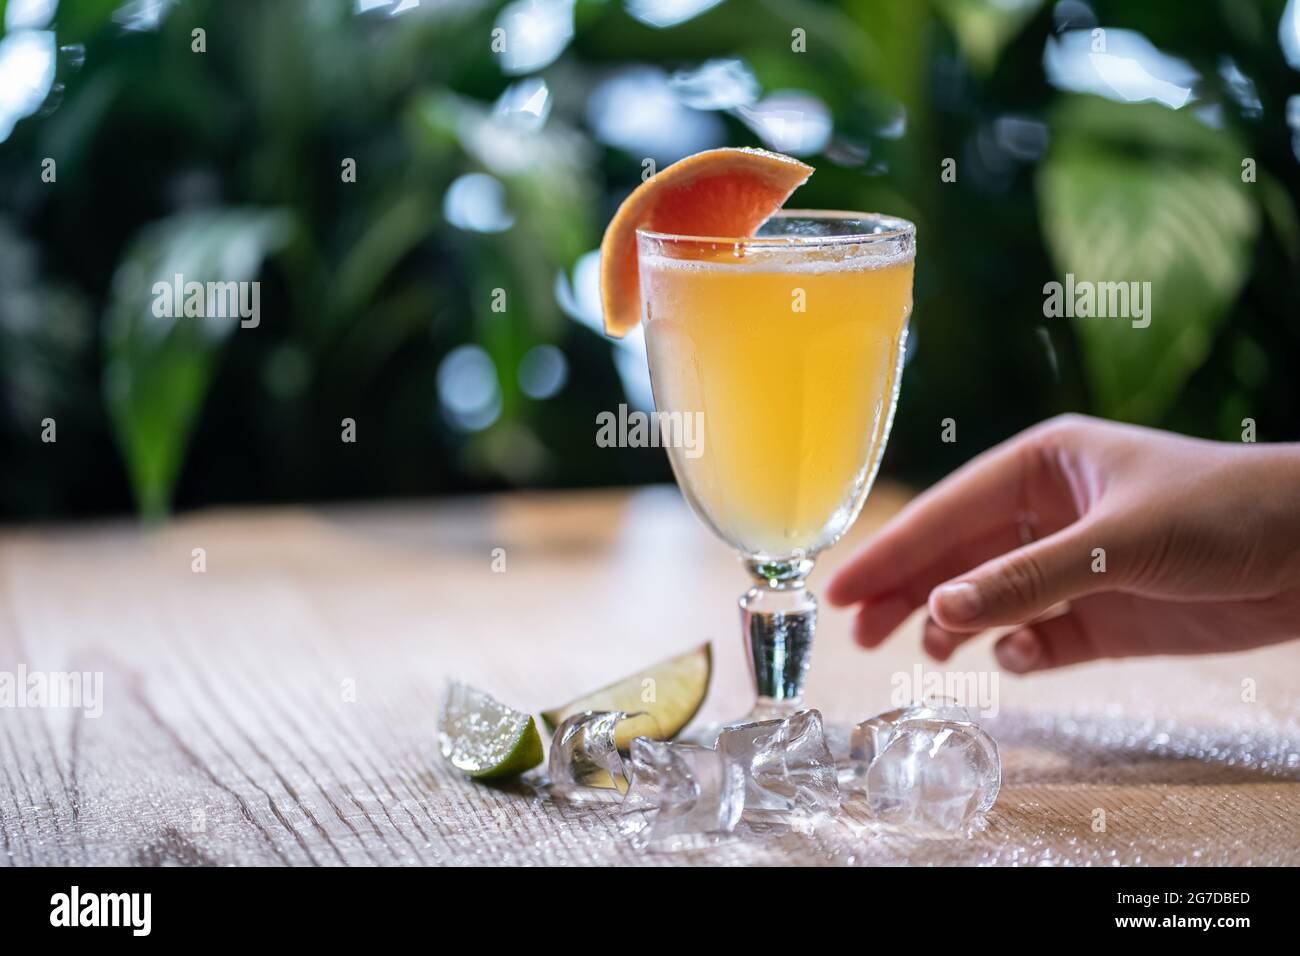 lemonade in glass or refreshing drink with grapefruit, lime and ice on table Stock Photo